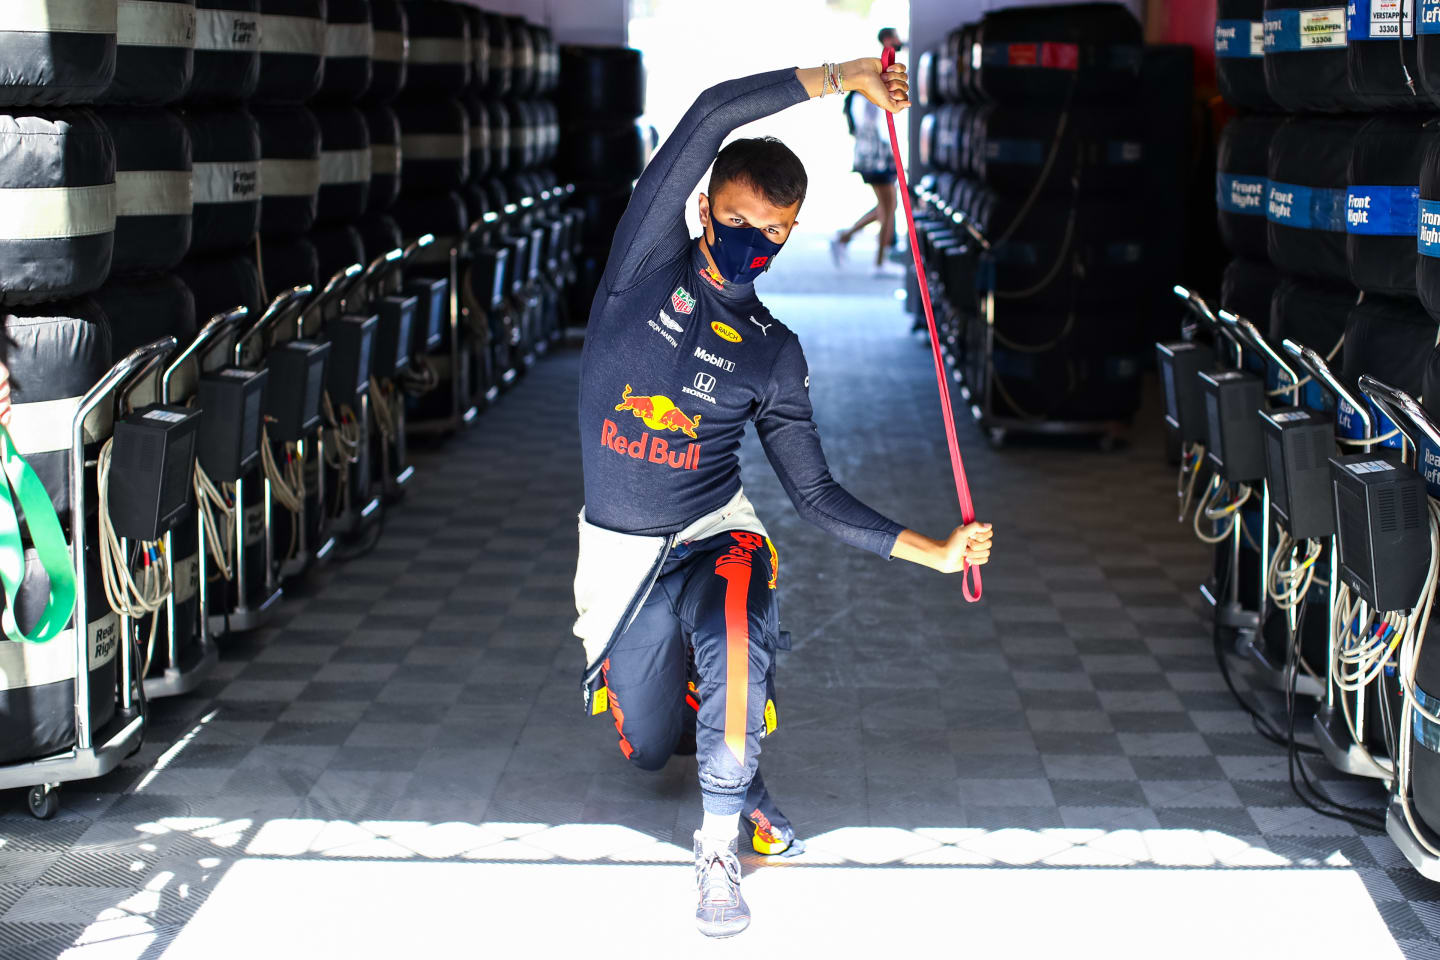 BARCELONA, SPAIN - AUGUST 15: Alexander Albon of Thailand and Red Bull Racing warms up before final practice for the F1 Grand Prix of Spain at Circuit de Barcelona-Catalunya on August 15, 2020 in Barcelona, Spain. (Photo by Mark Thompson/Getty Images)